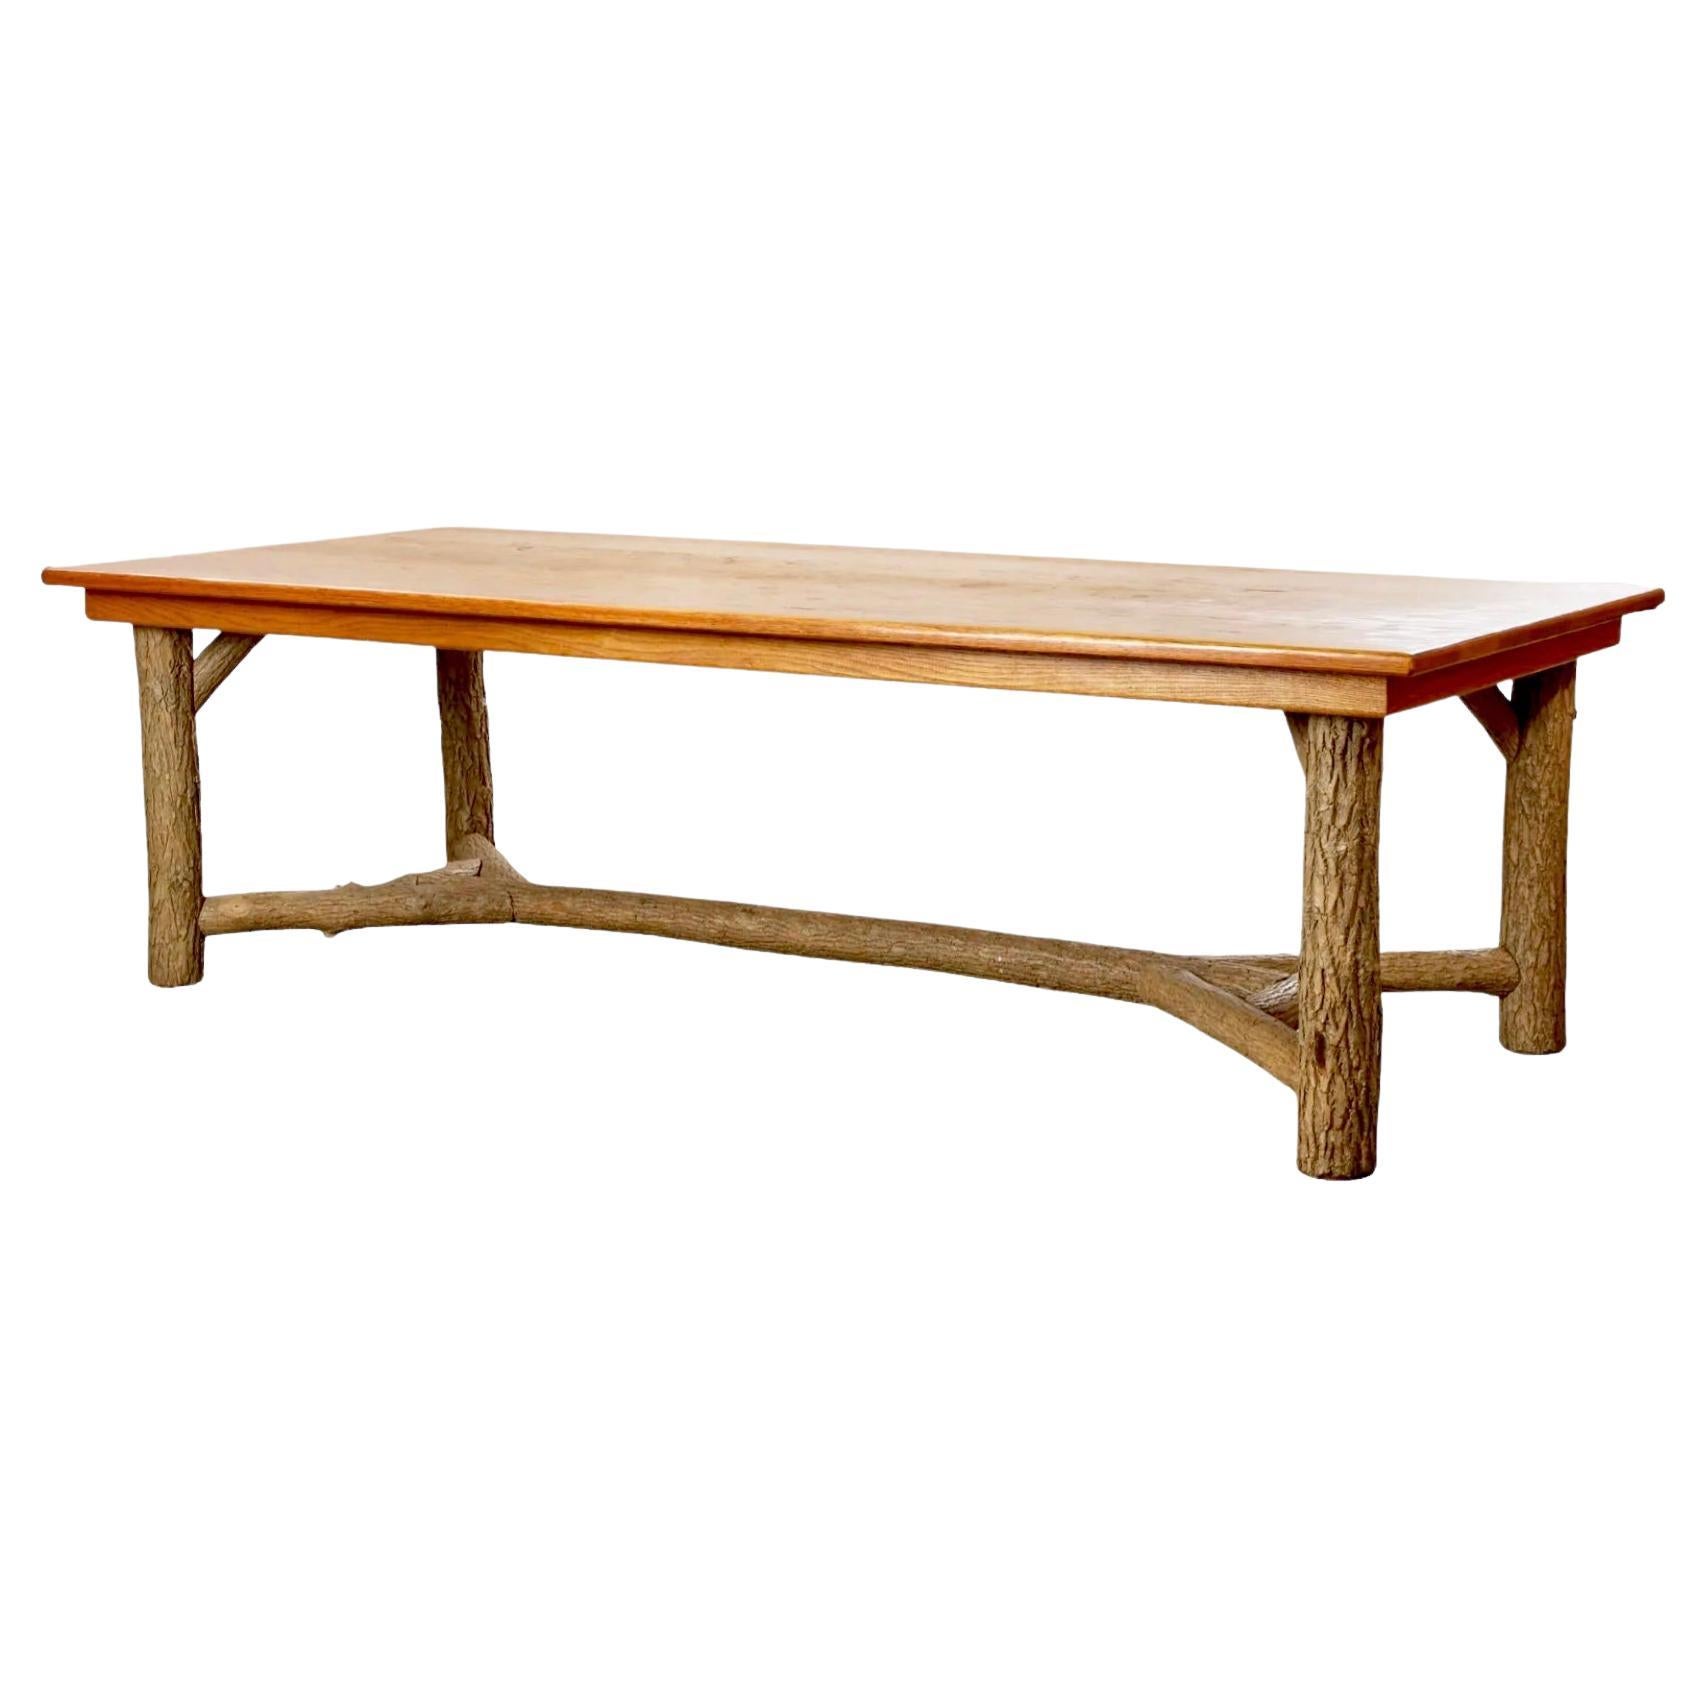 Rustic Or Primitive Faux Bois Eco-Friendly Hand Crafted La Lune Dining Table 